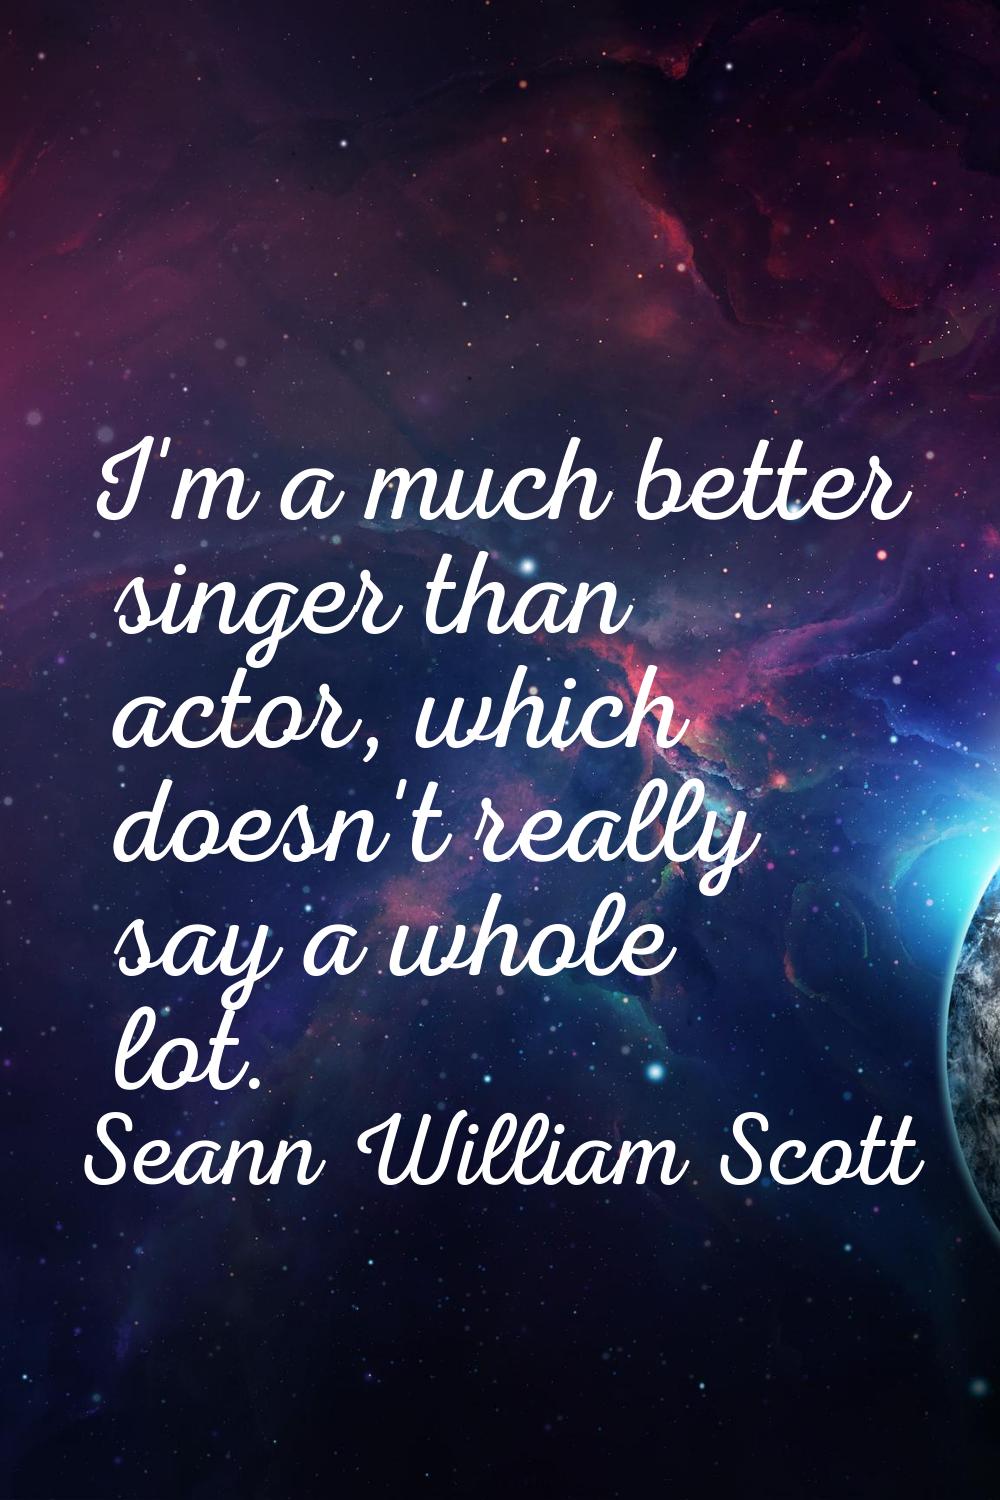 I'm a much better singer than actor, which doesn't really say a whole lot.